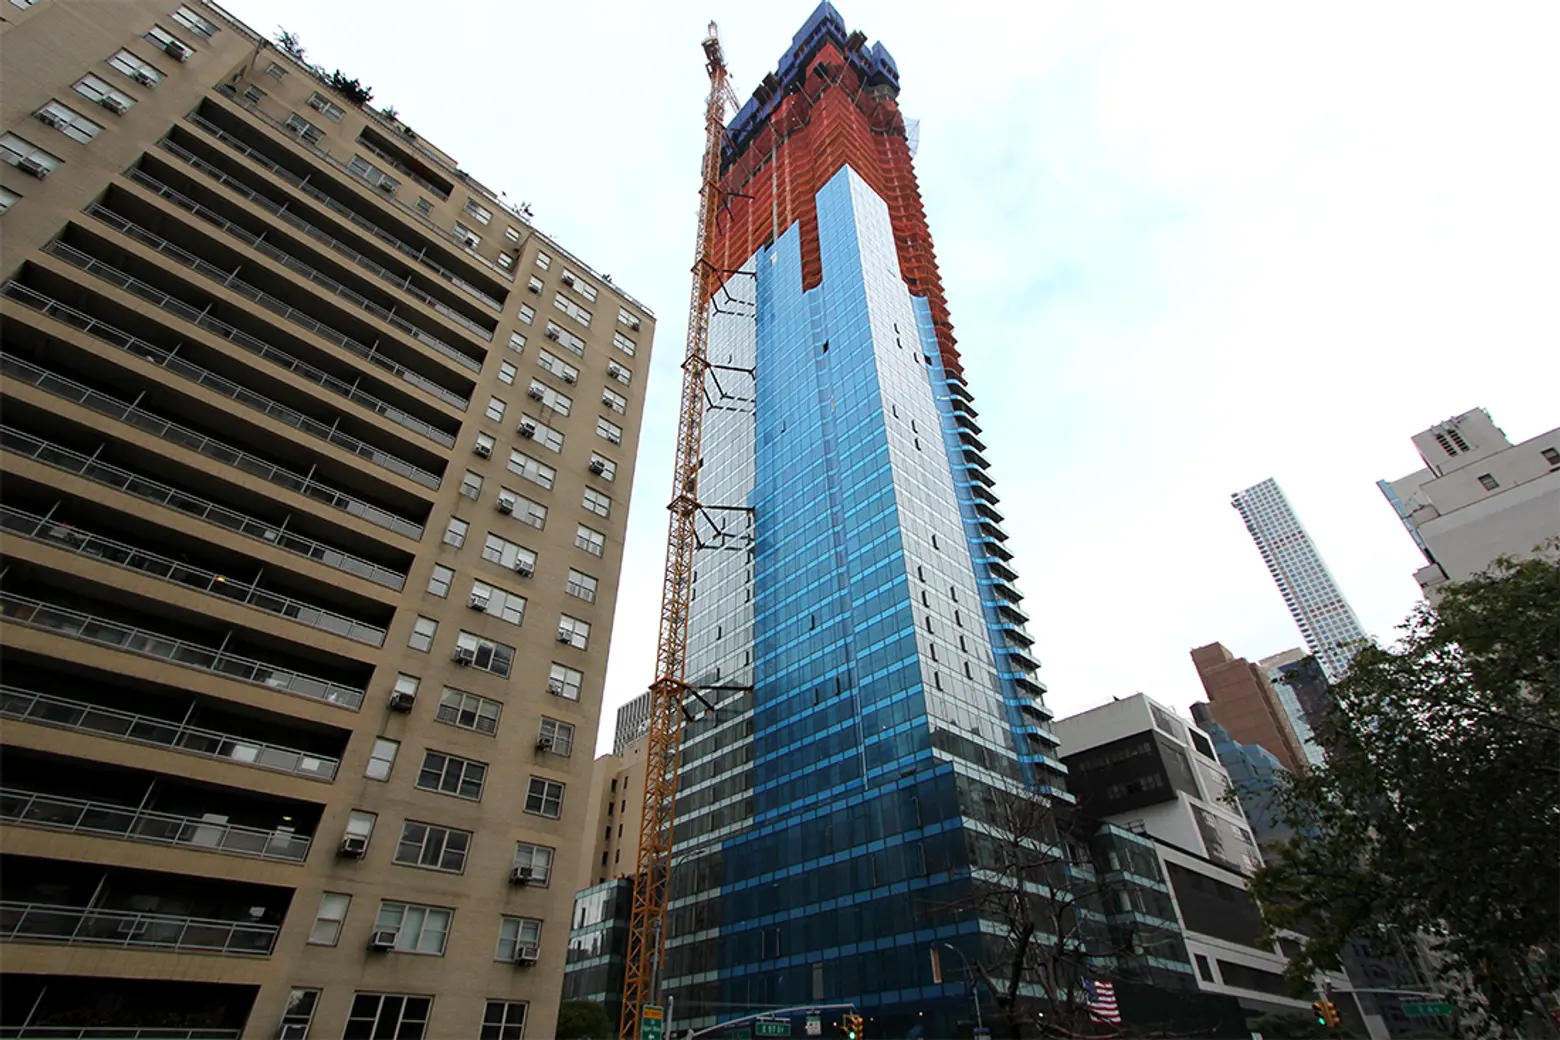 252 East 57th Street Tops Off Construction Ten Years After Innovative Public-Private Partnership